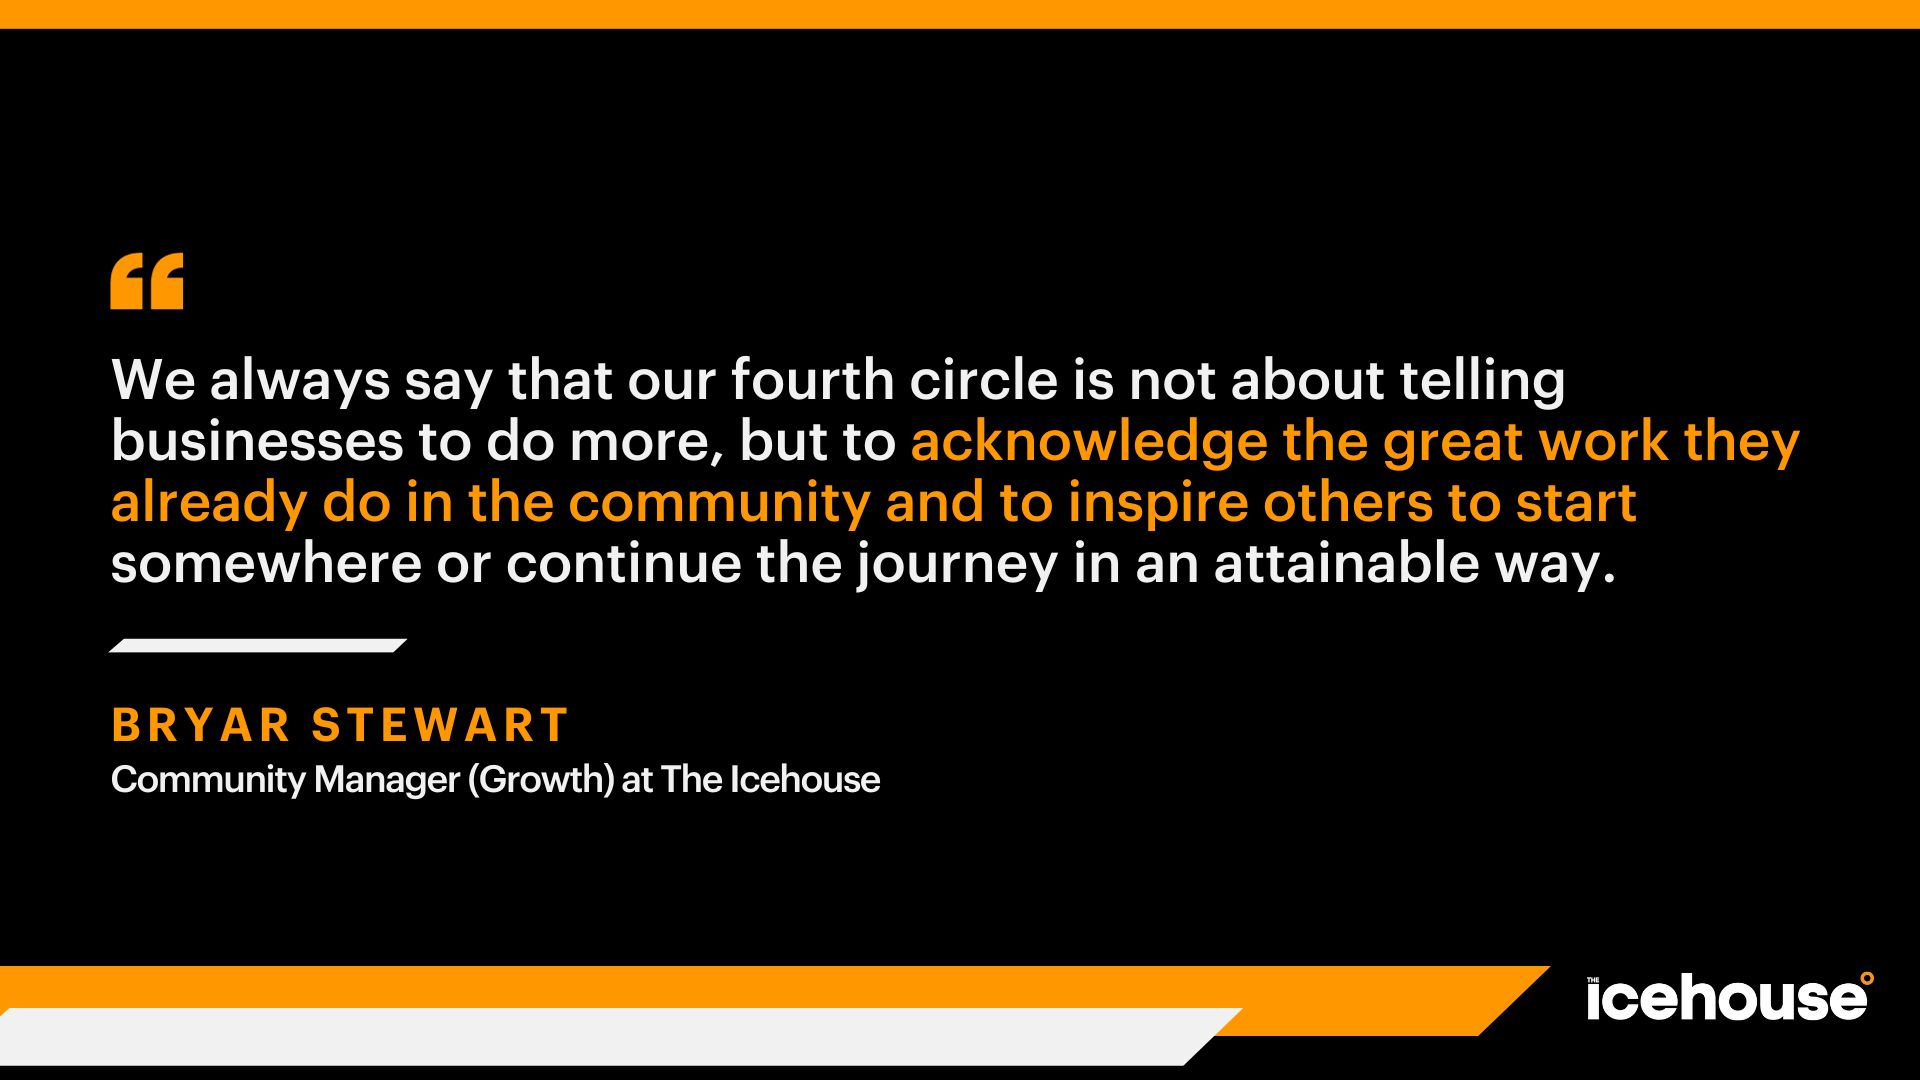 The Four Circles – You in the Community